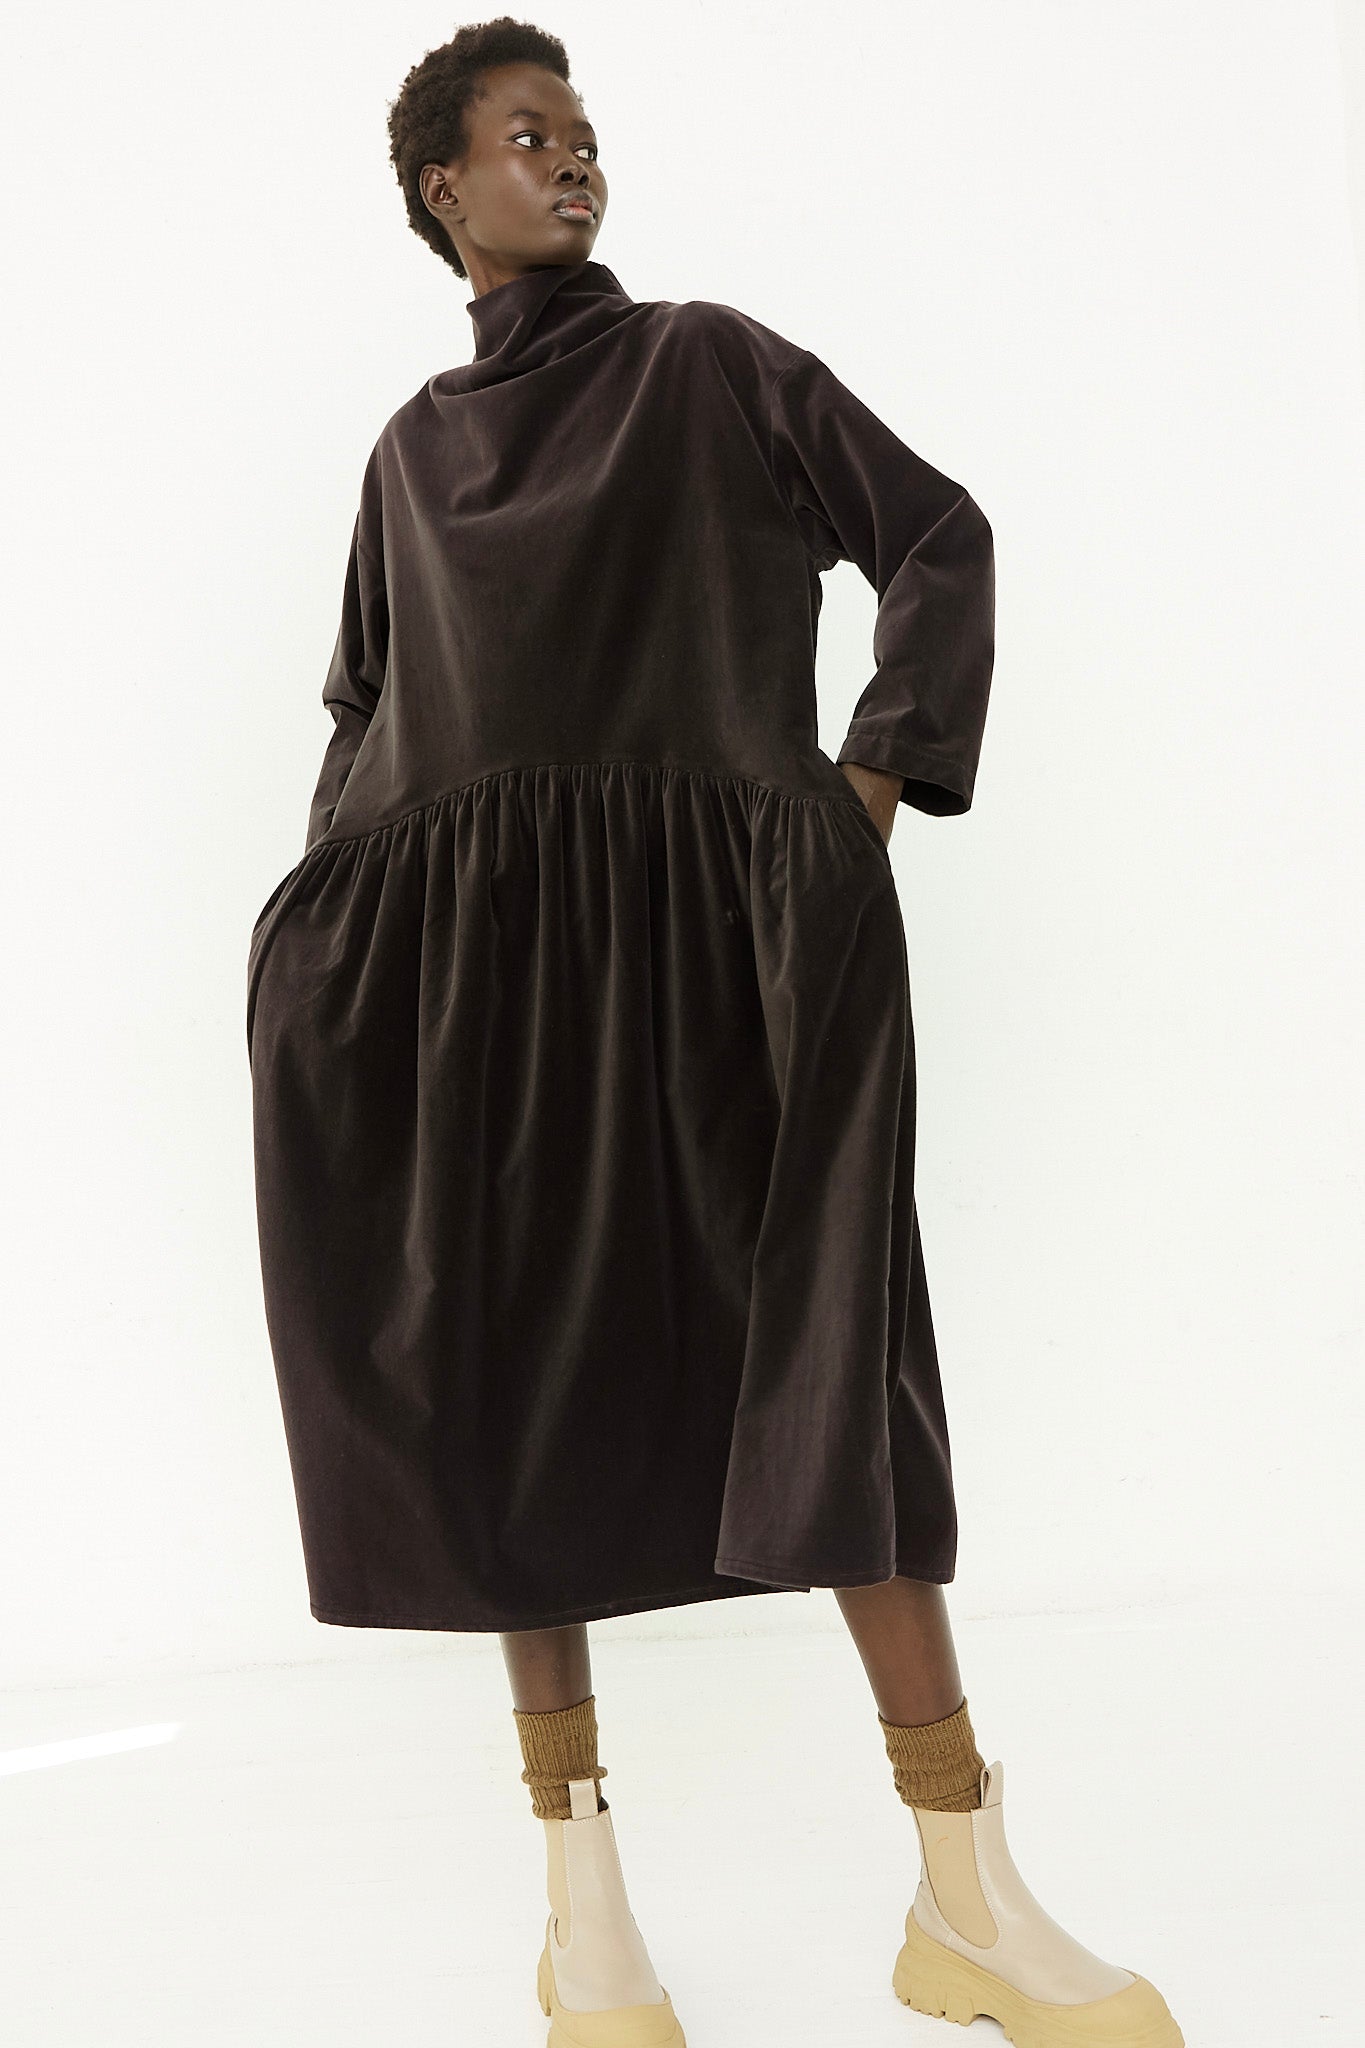 The model is wearing a black dress with a ruffled sleeve.